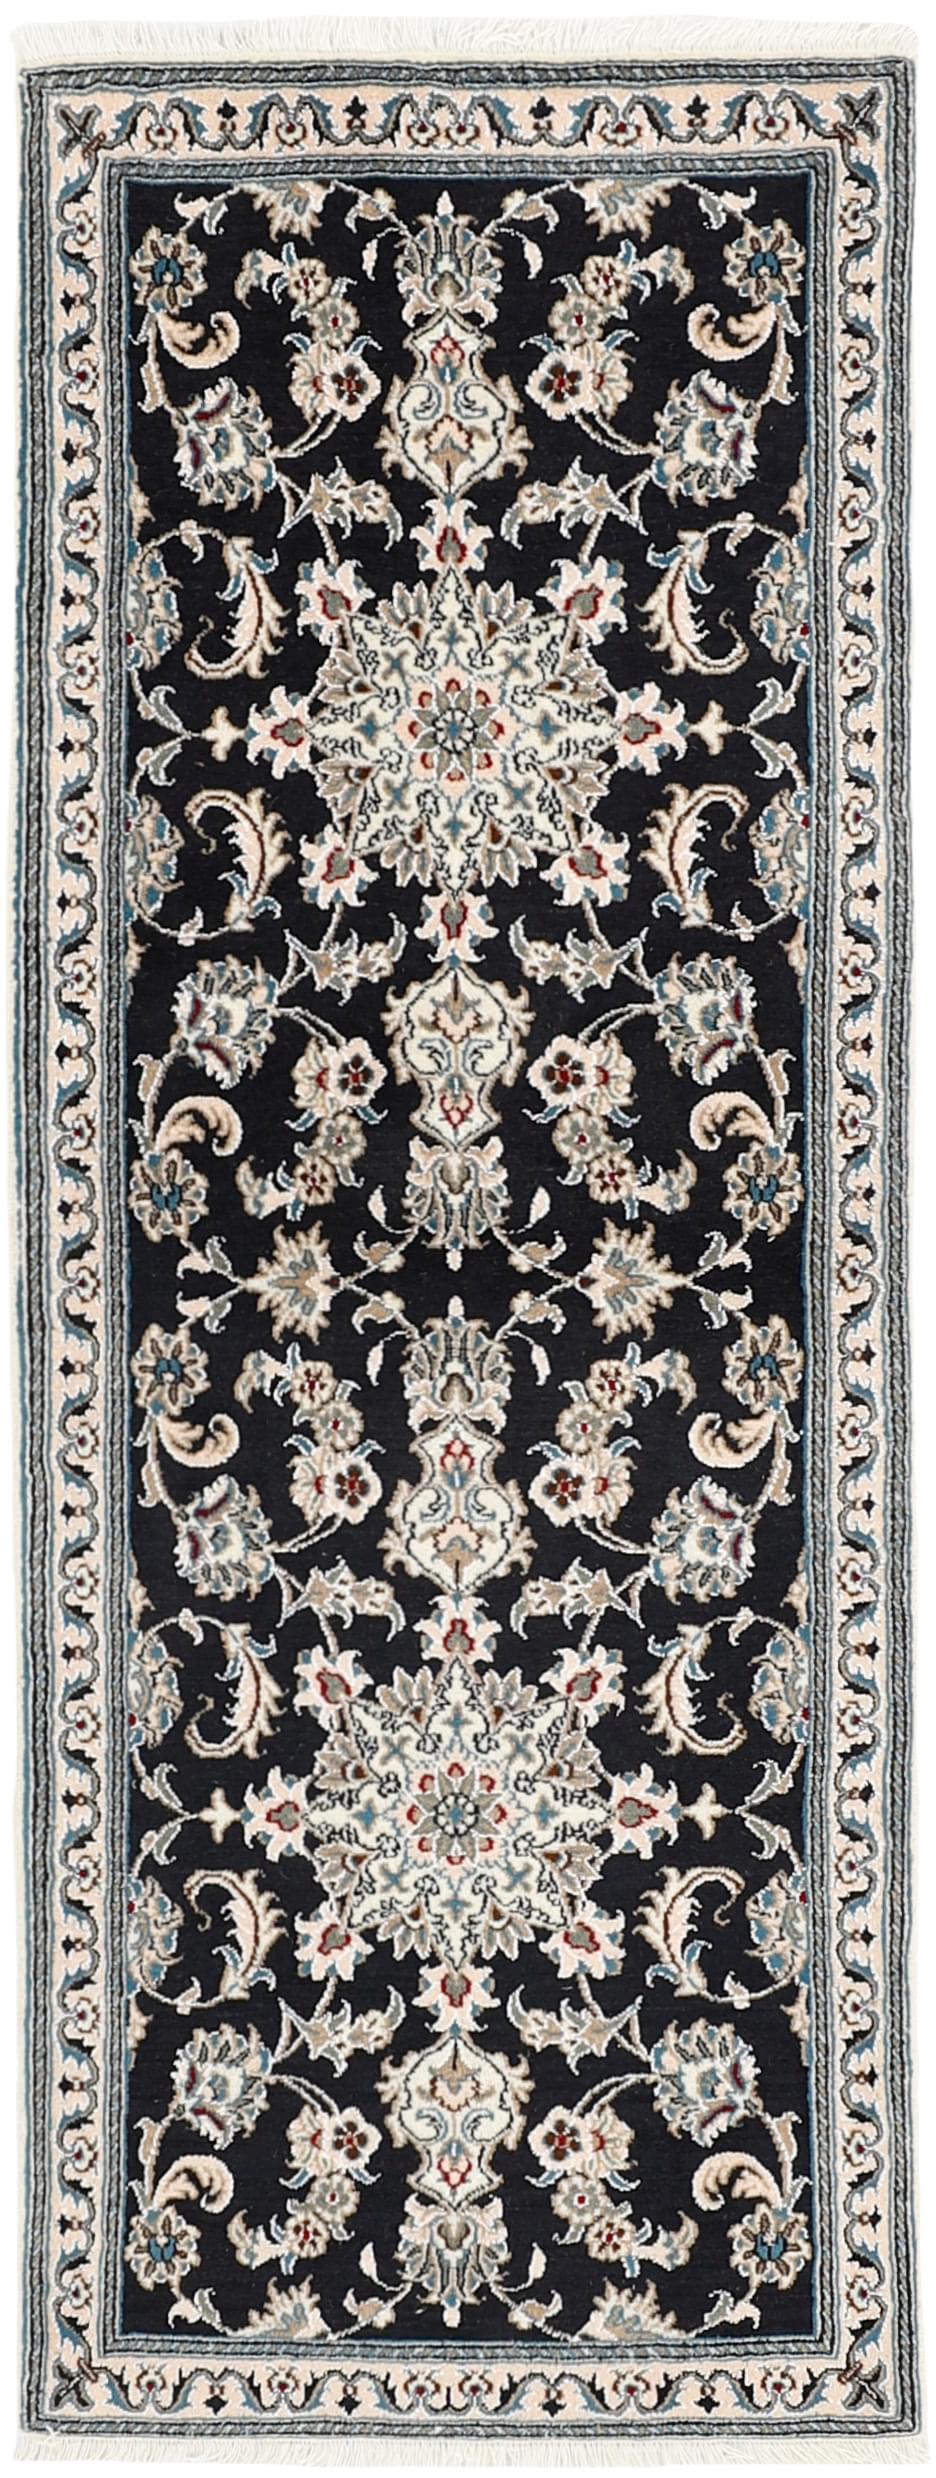 authentic persian runner with navy and black floral design